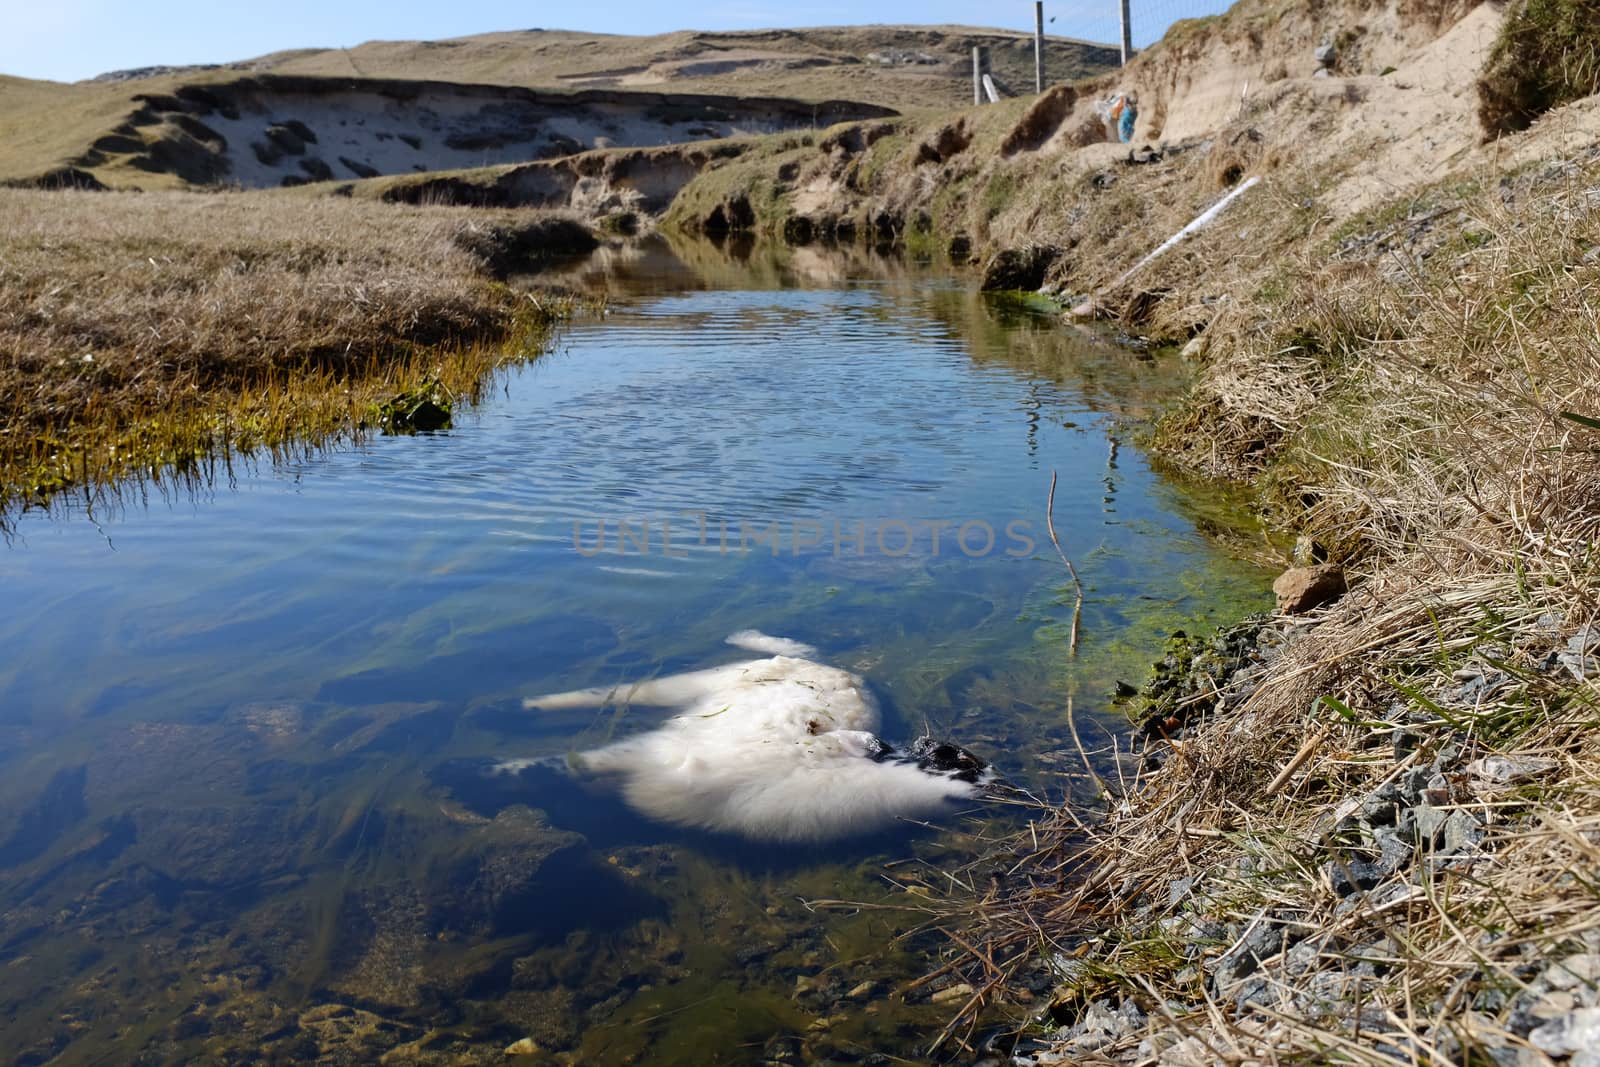 A lamb submerged in a stream with water leading away towards sand dunes.